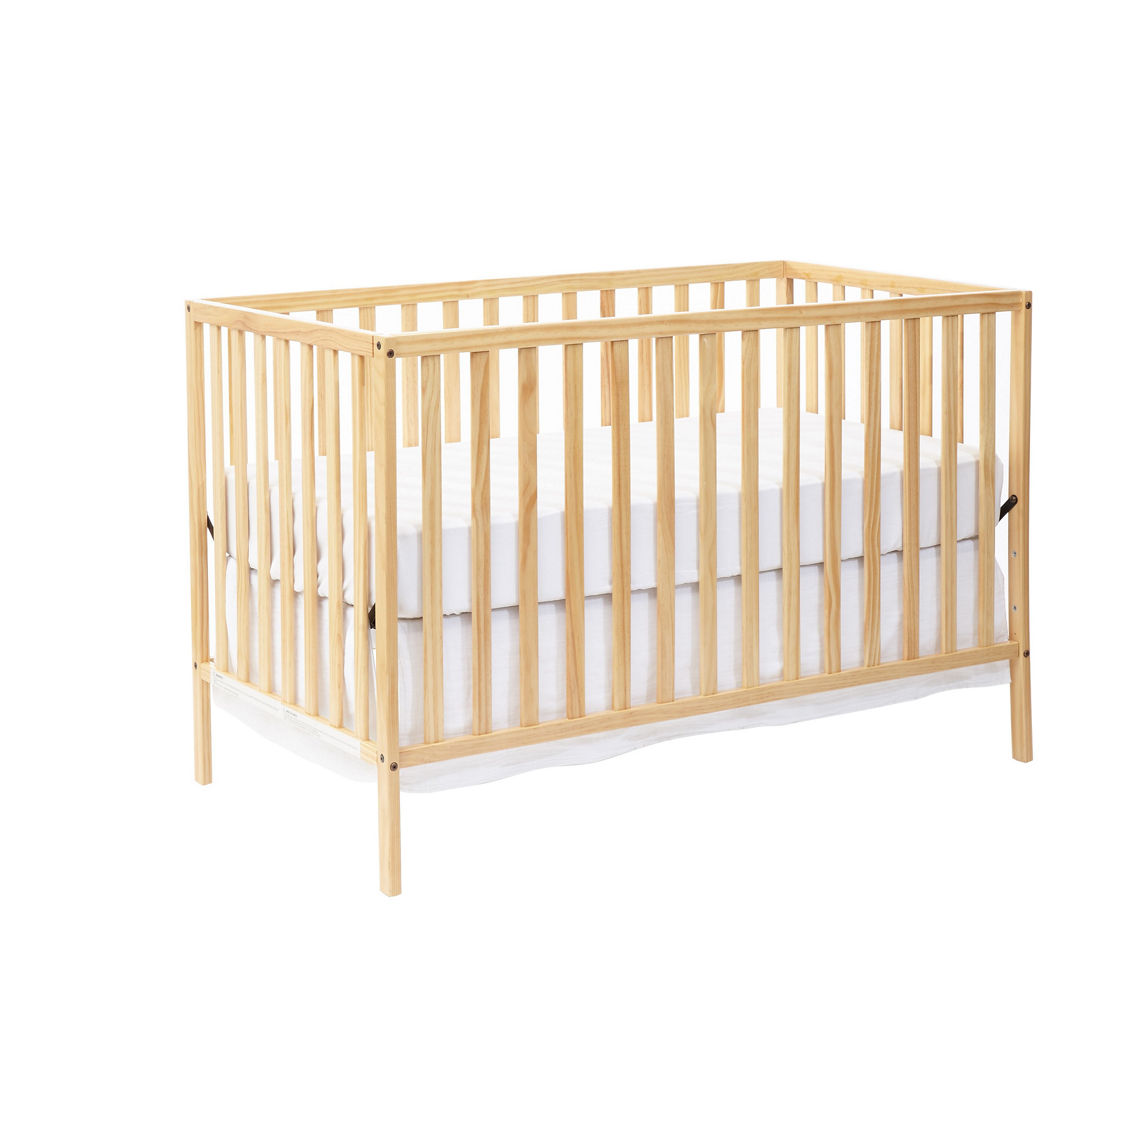 Suite Bebe Palmer 3-in-1 Convertible Island Crib Natural - Image 3 of 5